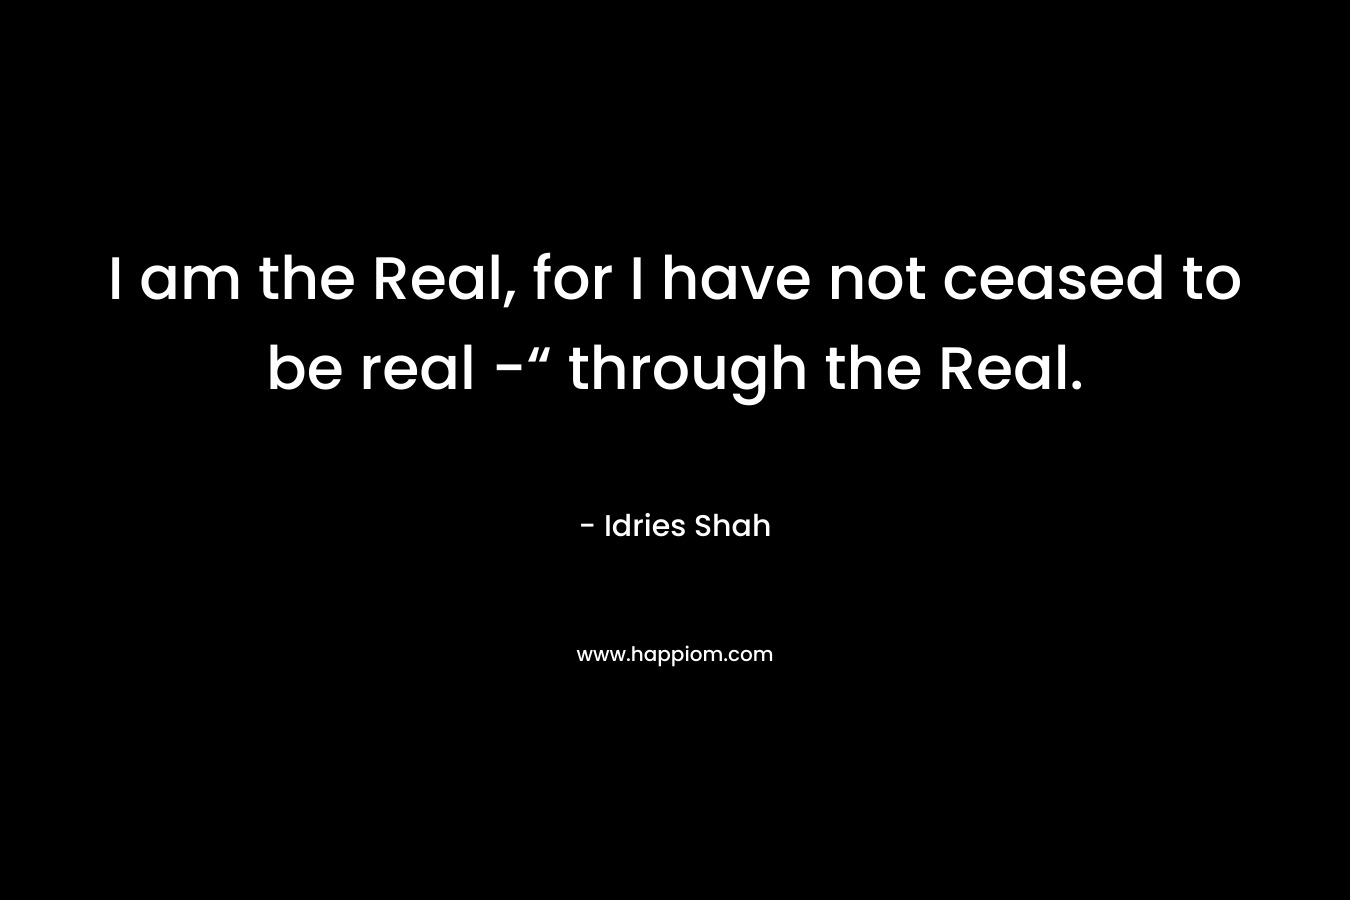 I am the Real, for I have not ceased to be real -“ through the Real.